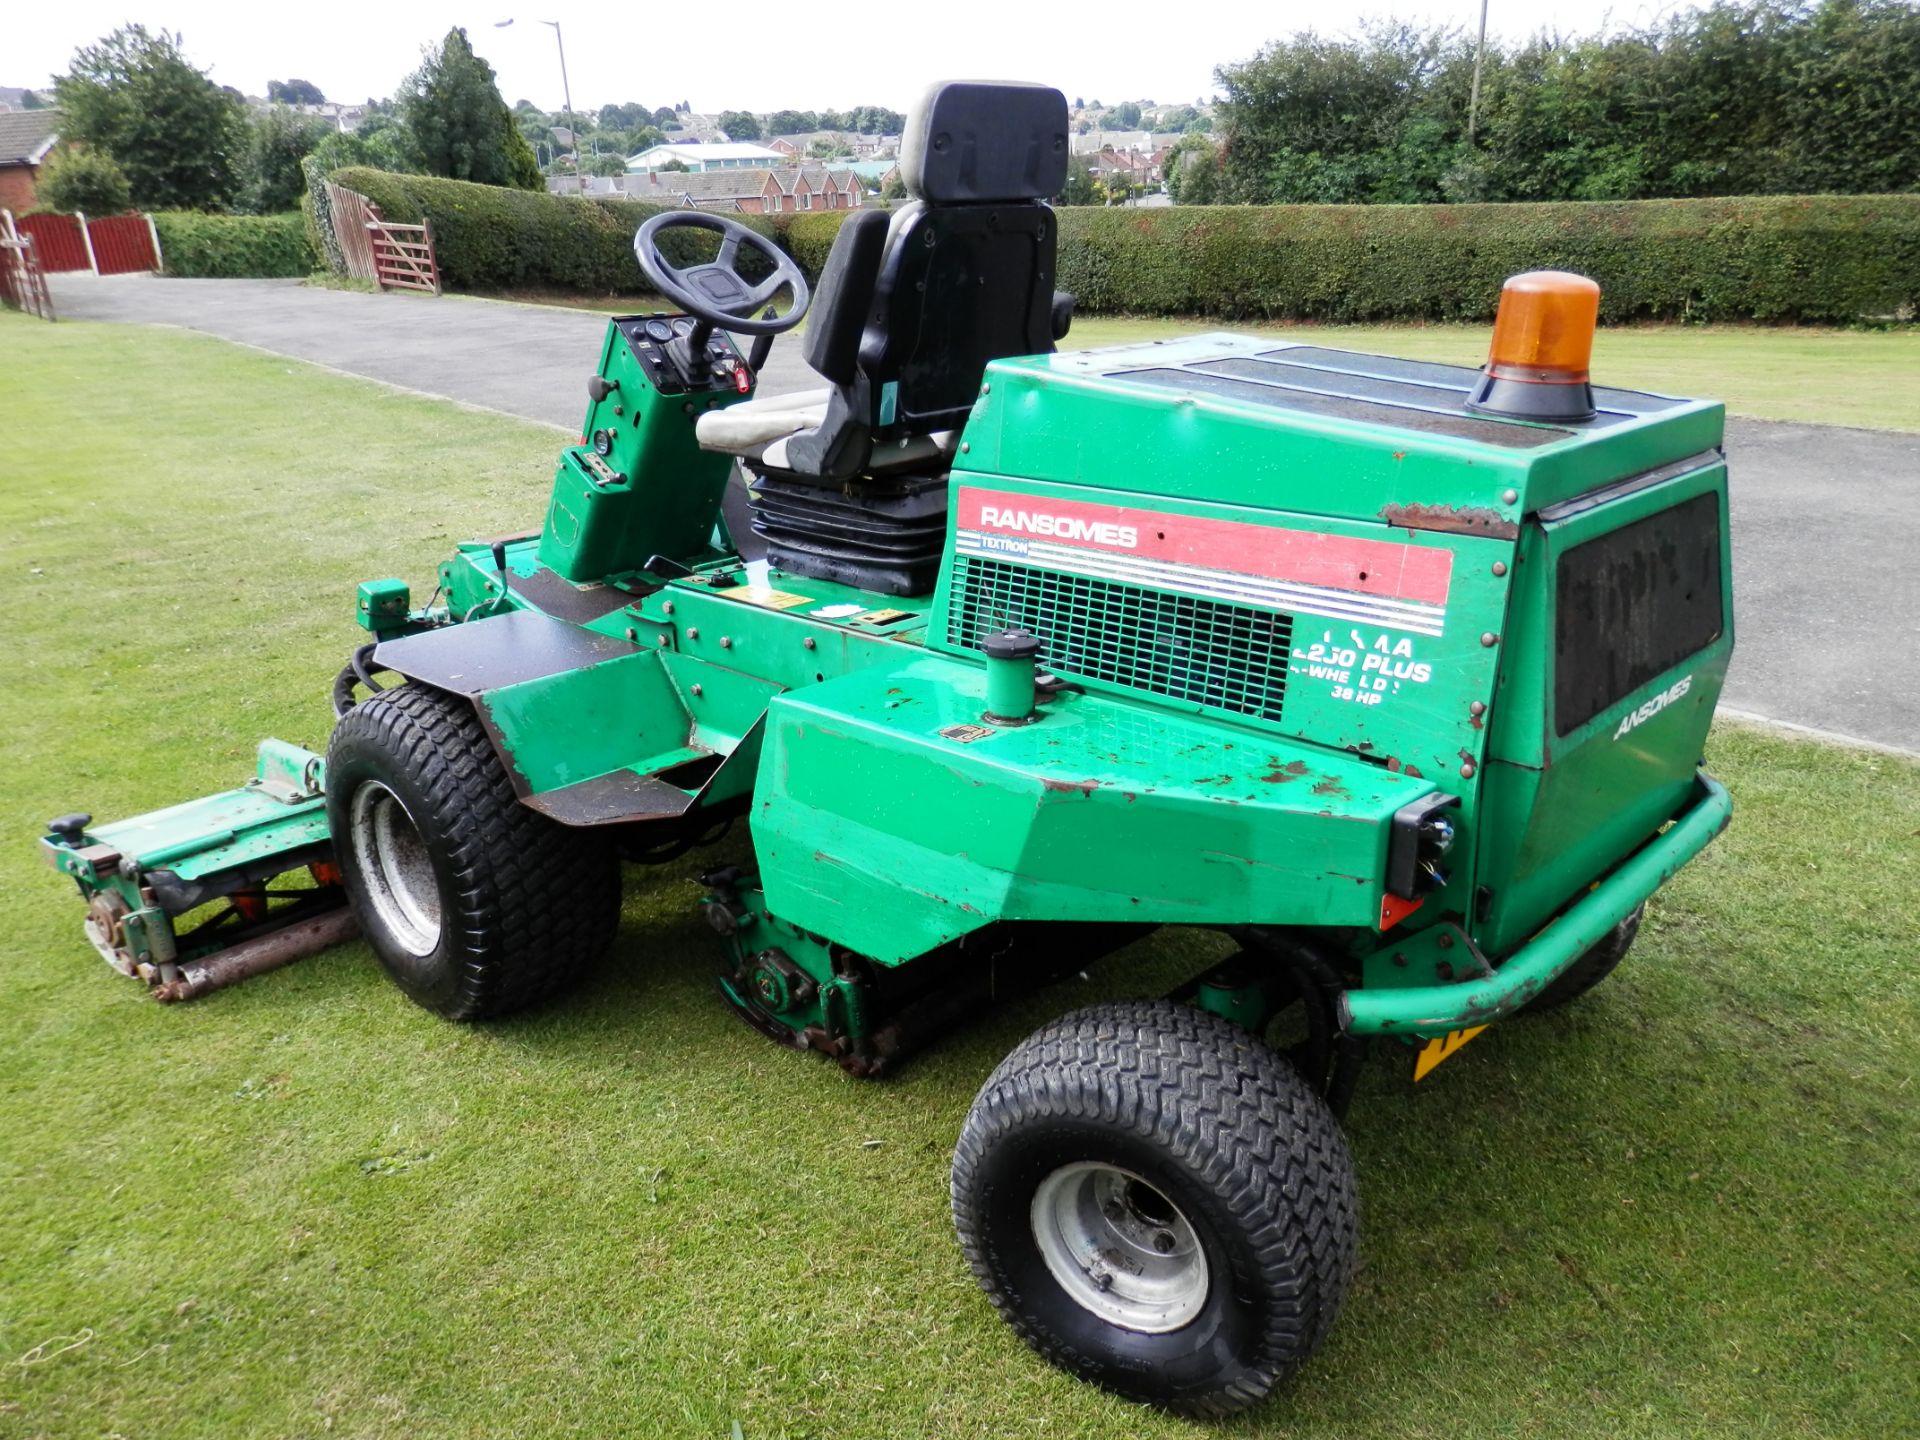 2000 MODEL REGISTERED 2001, RANSOMES PARKWAY RIDE ON 3 BLADE MOWER, WIDE CUT AREA.WORKING. NO VAT !! - Image 6 of 15